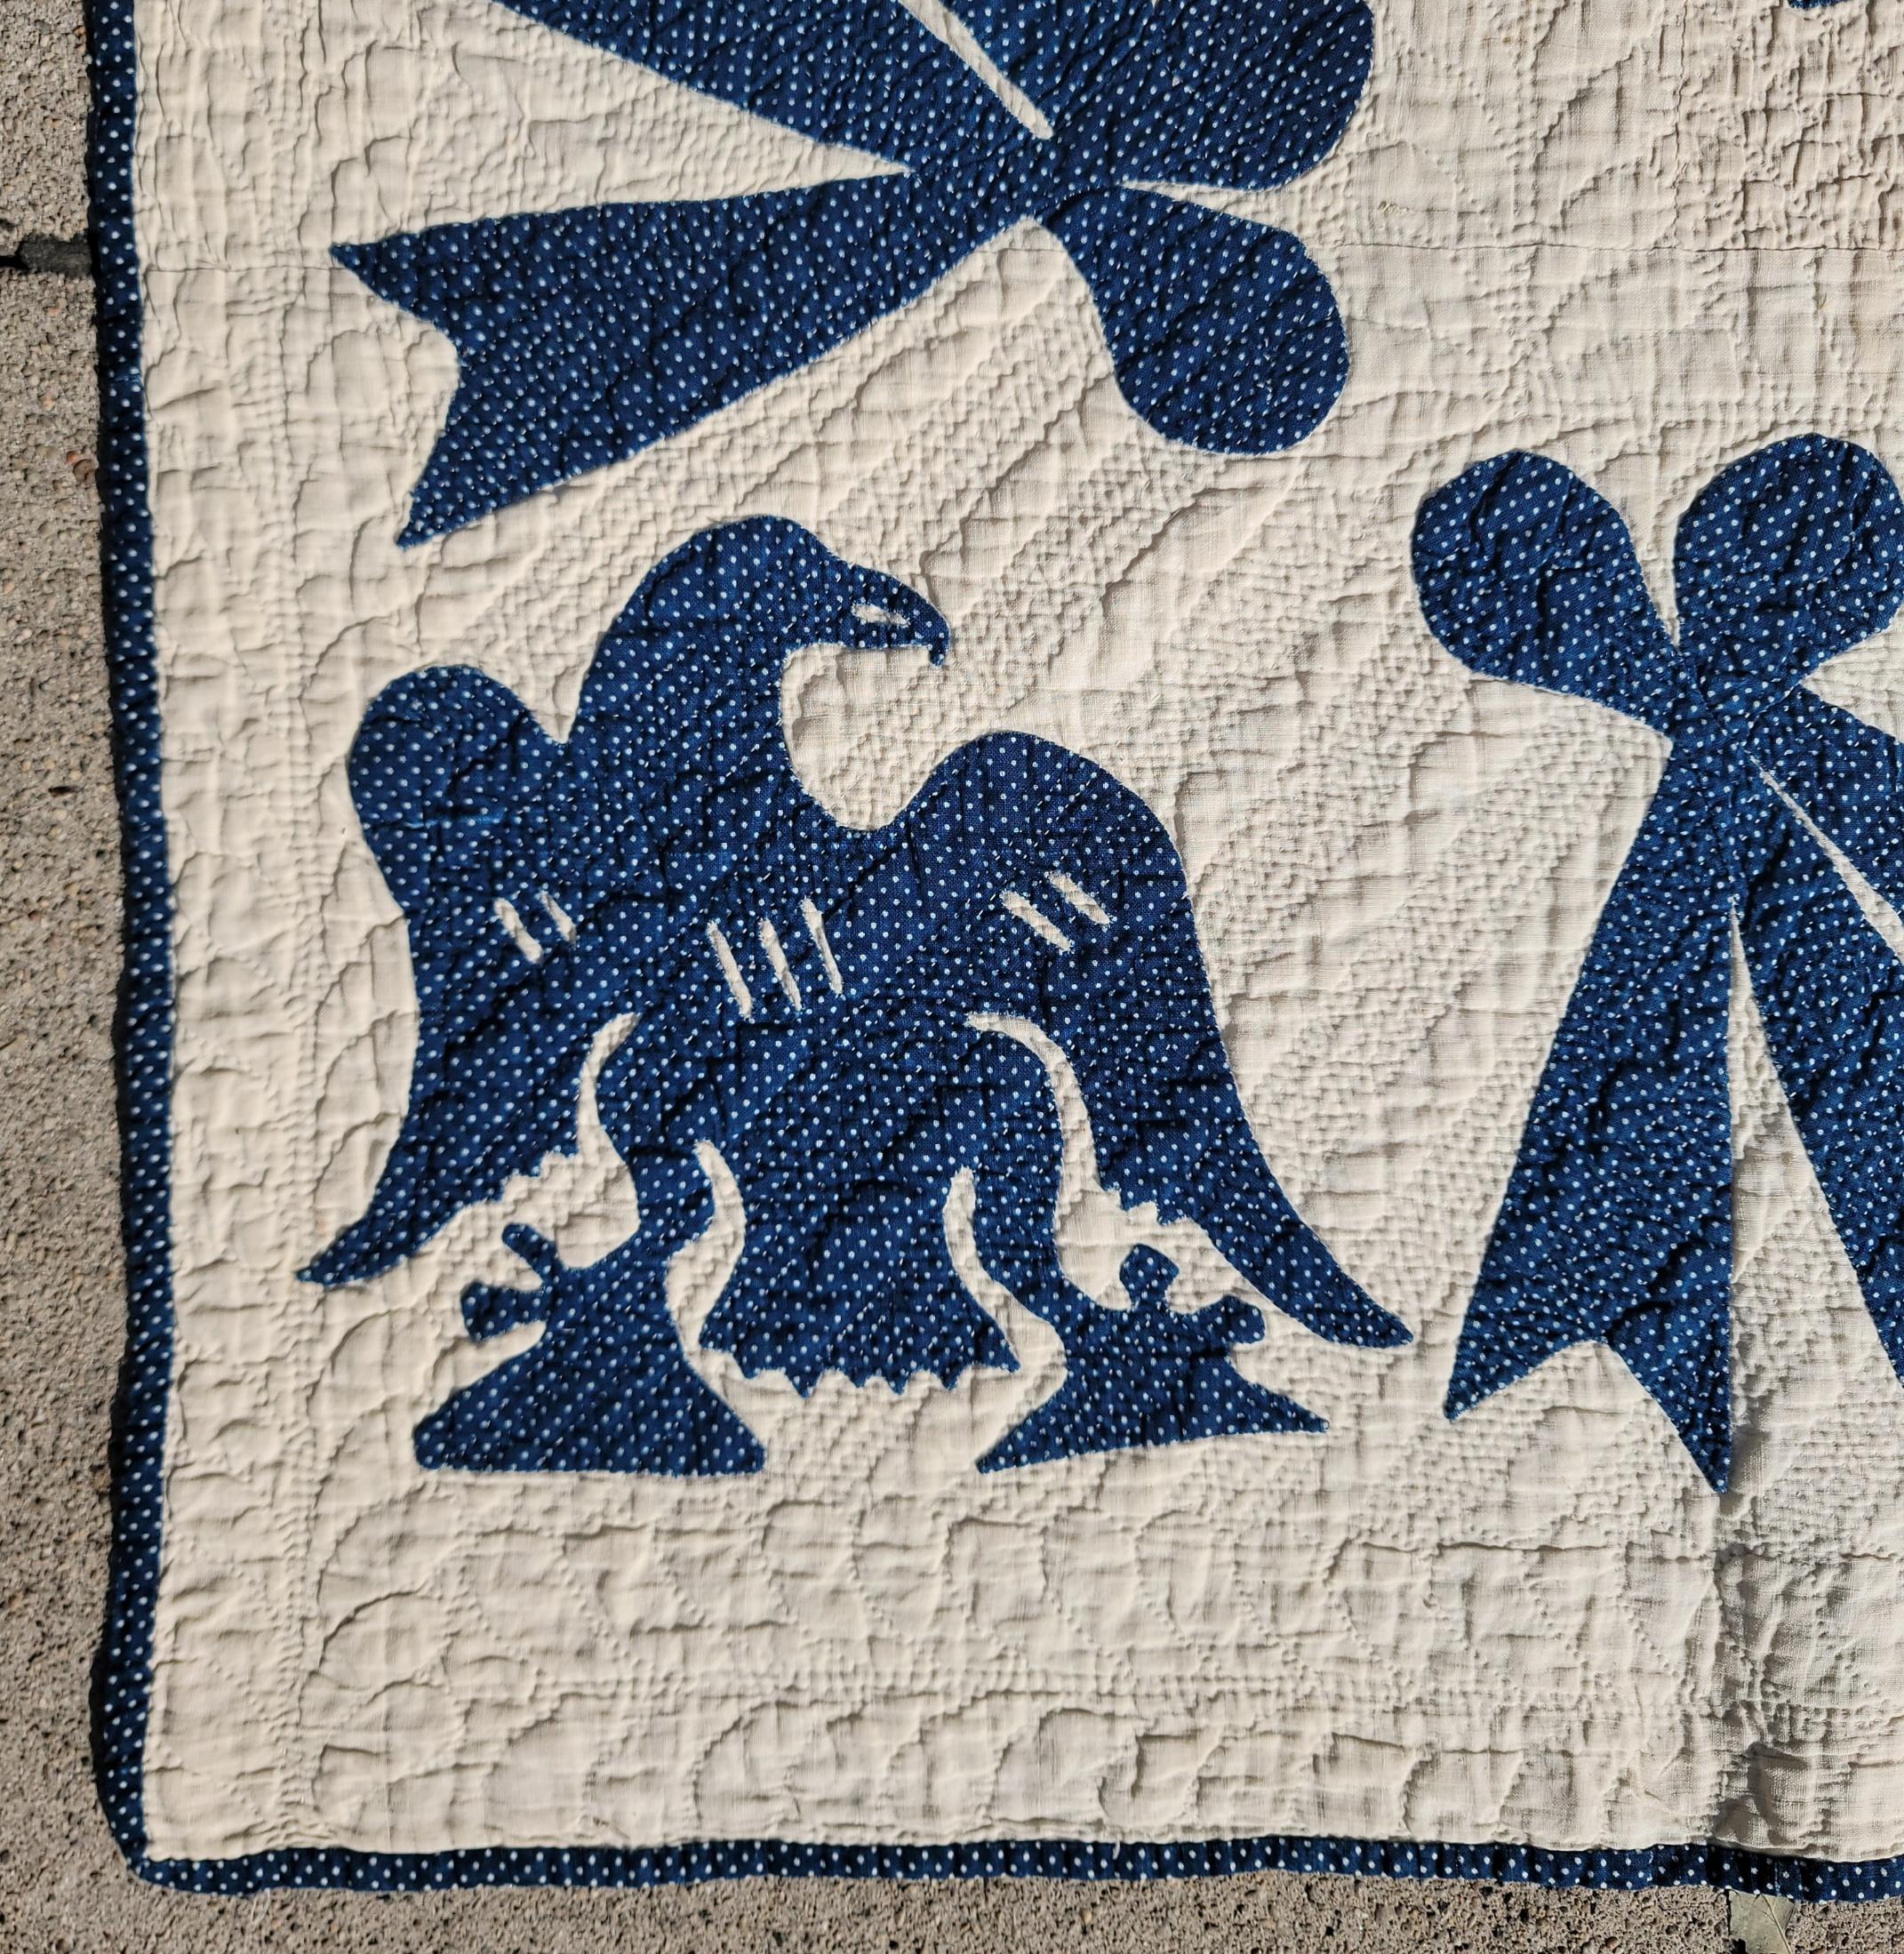 Hand-Crafted 19th Century Blue & White Floral & Birds Applique Quilt